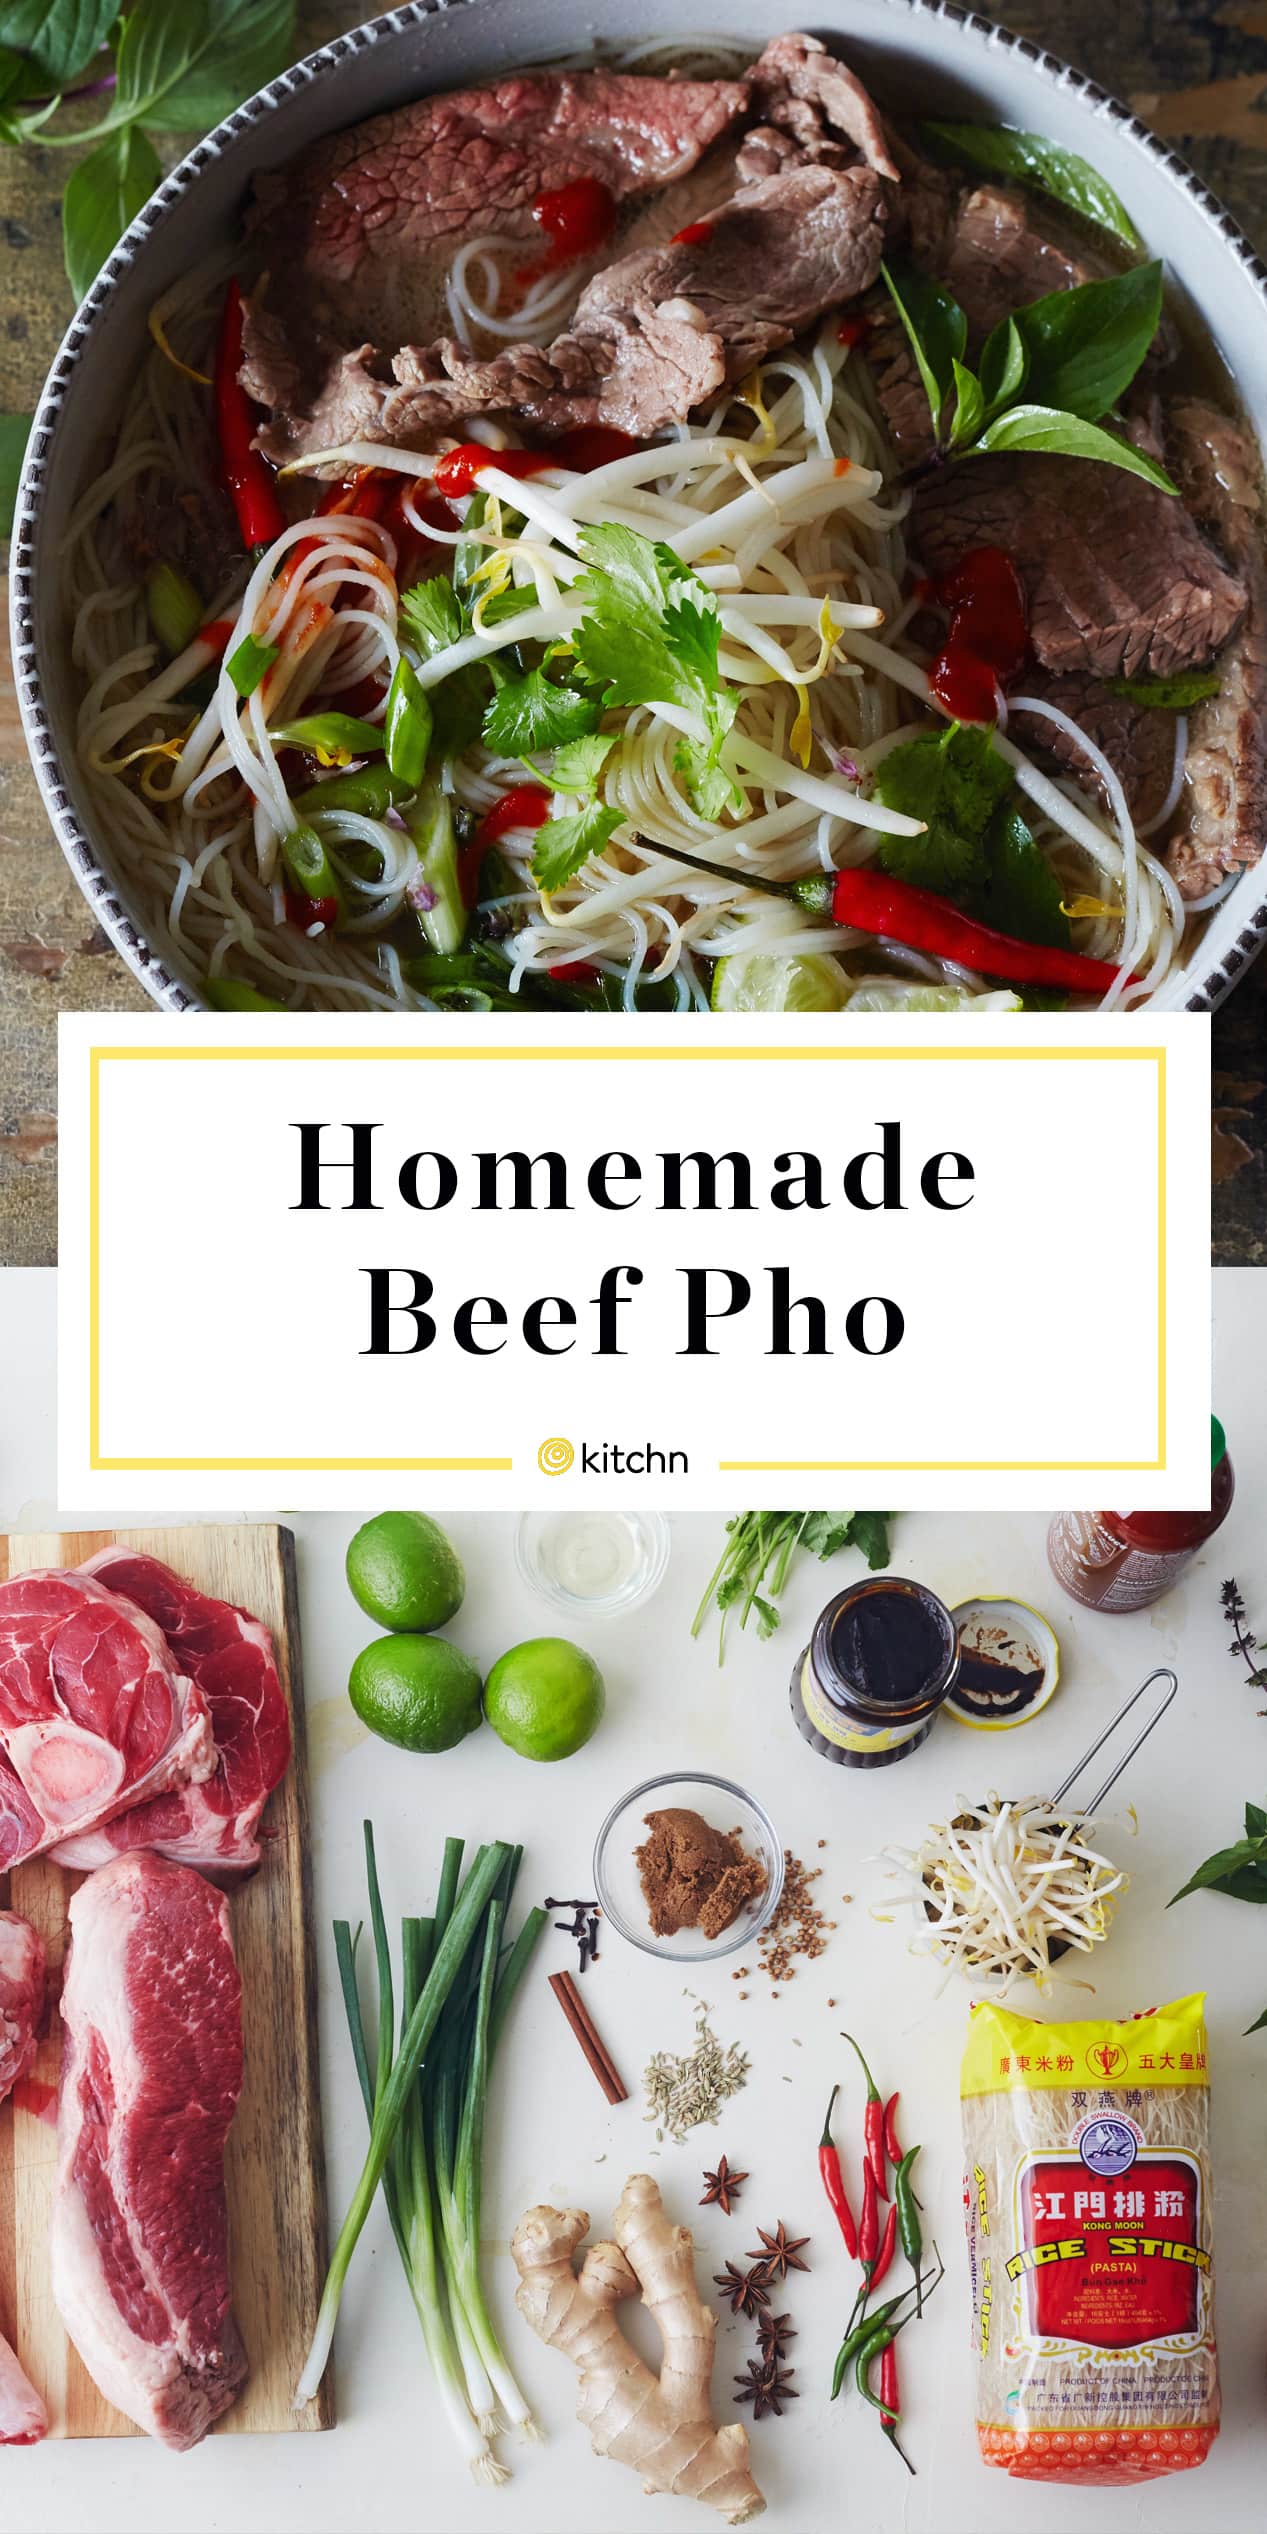 How To Make Pho The Best Method for Most Home Cooks Kitchn